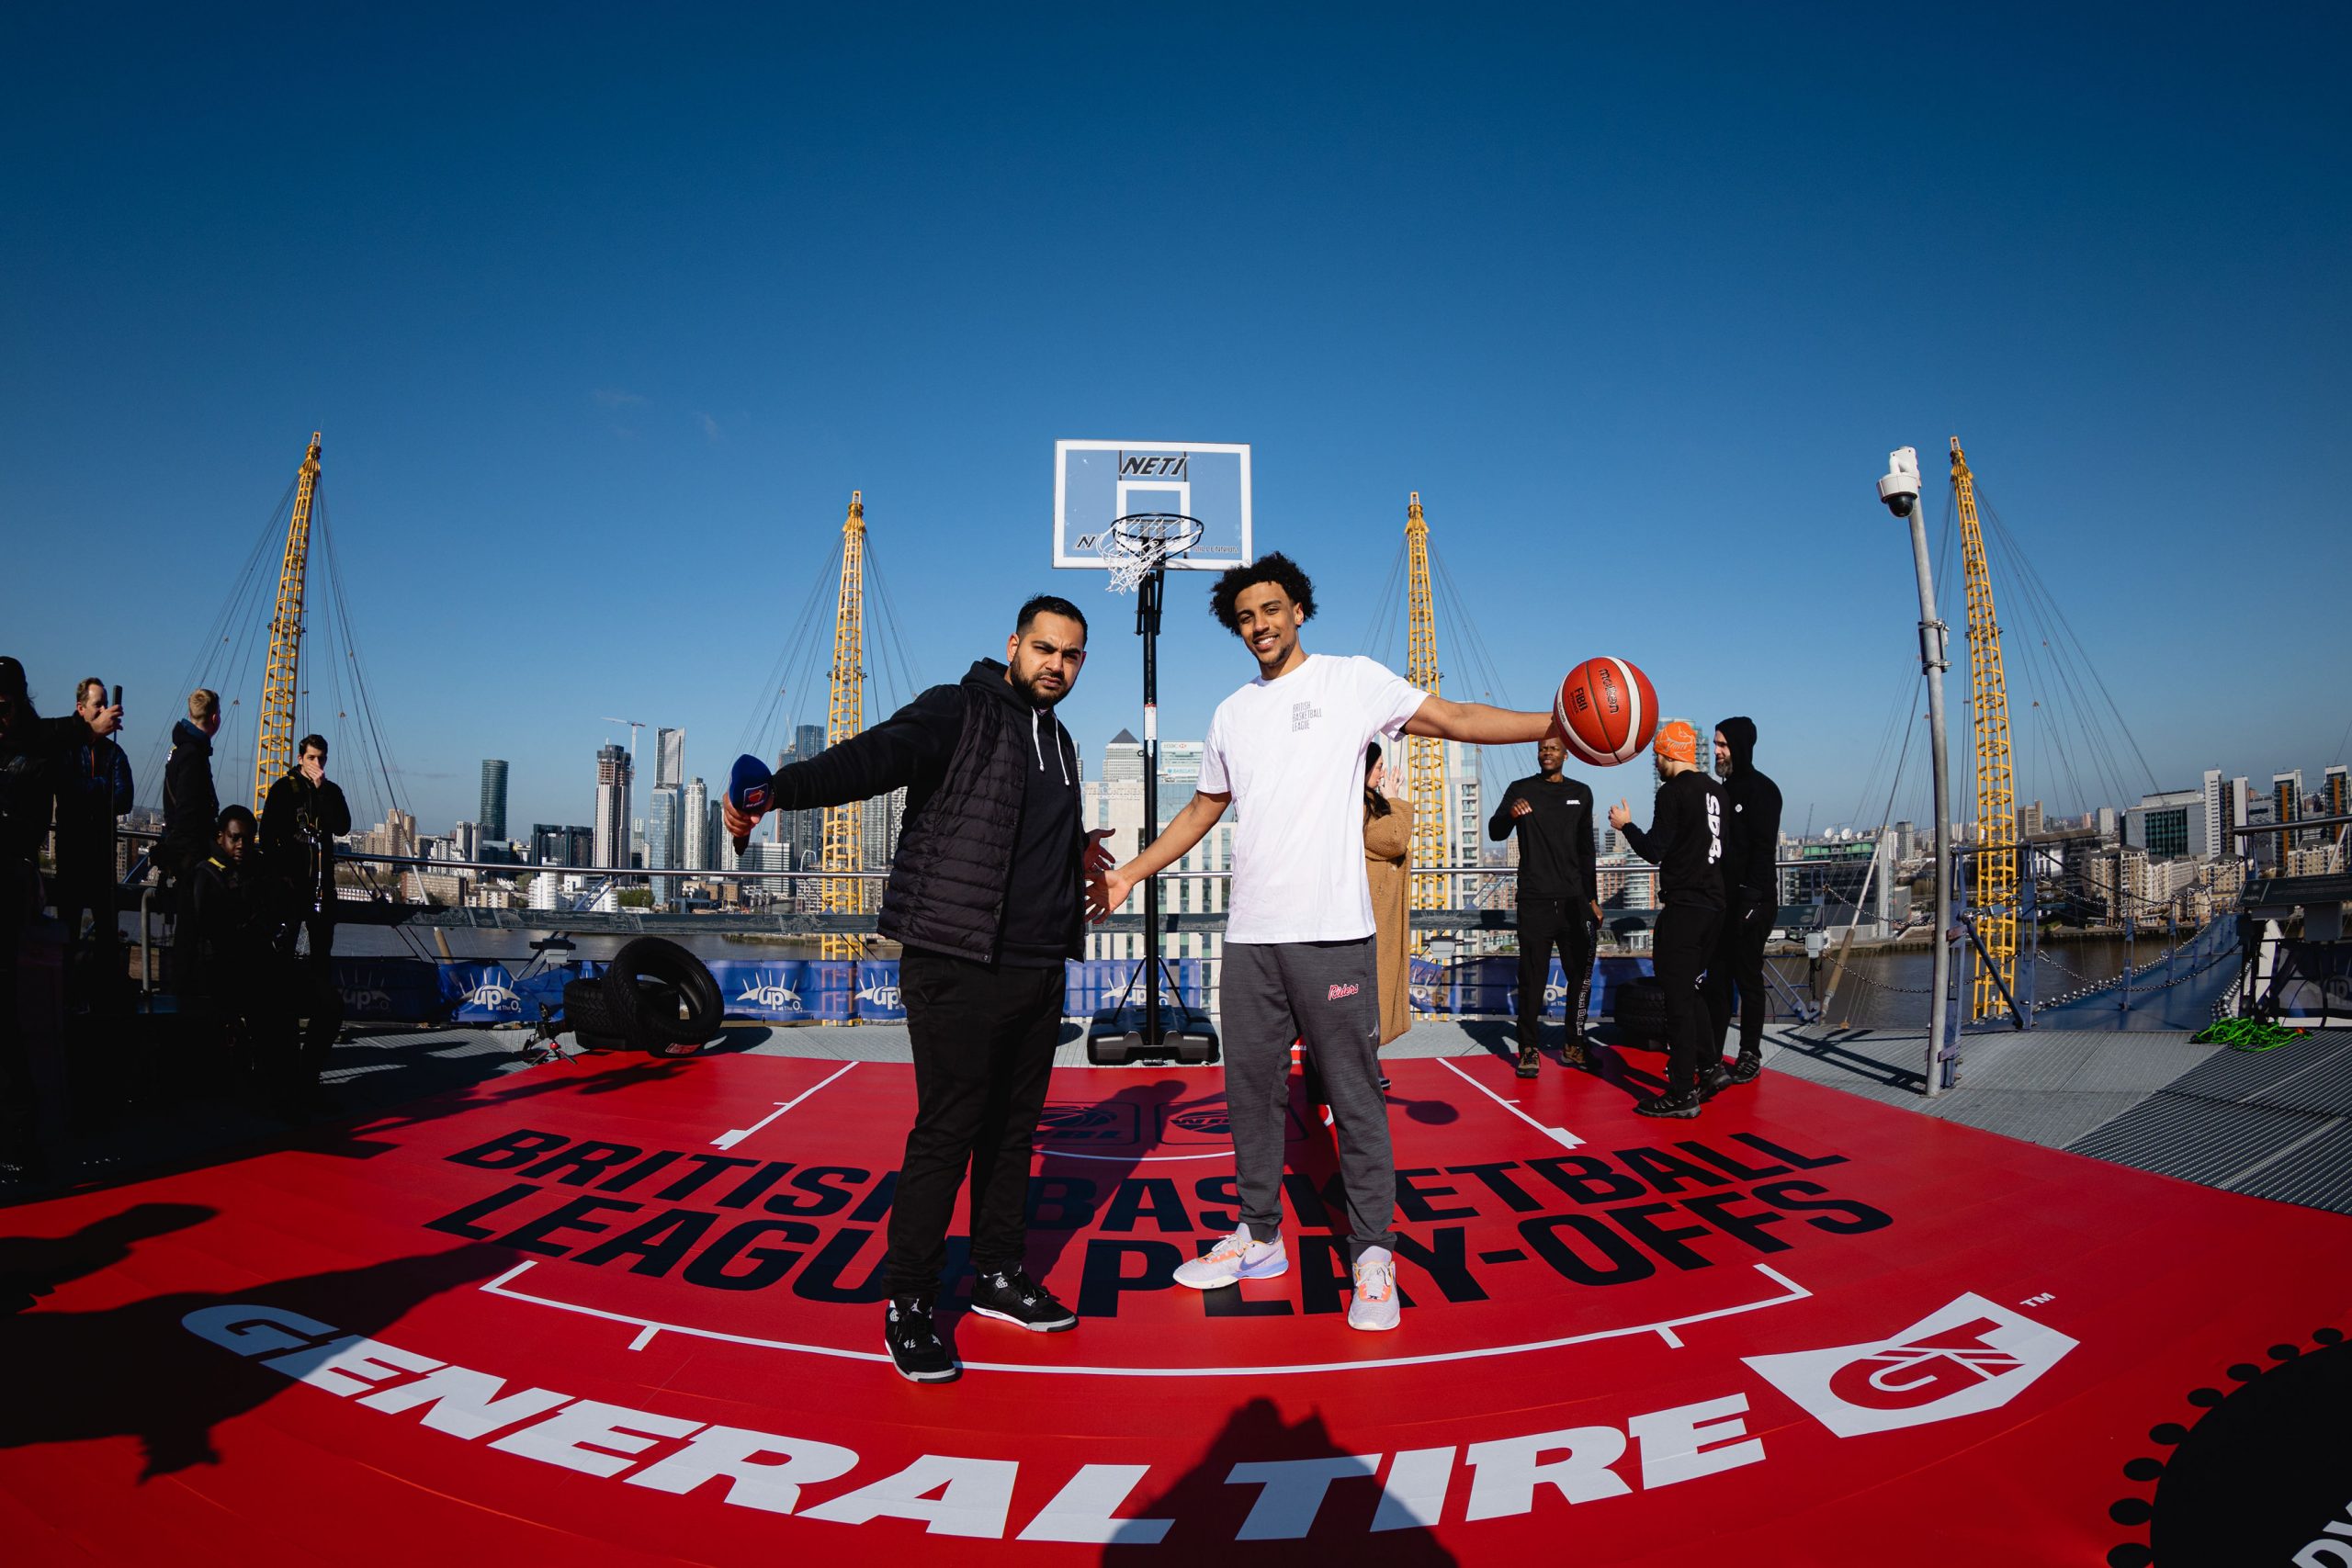 Bowman dunks on top of the O2!